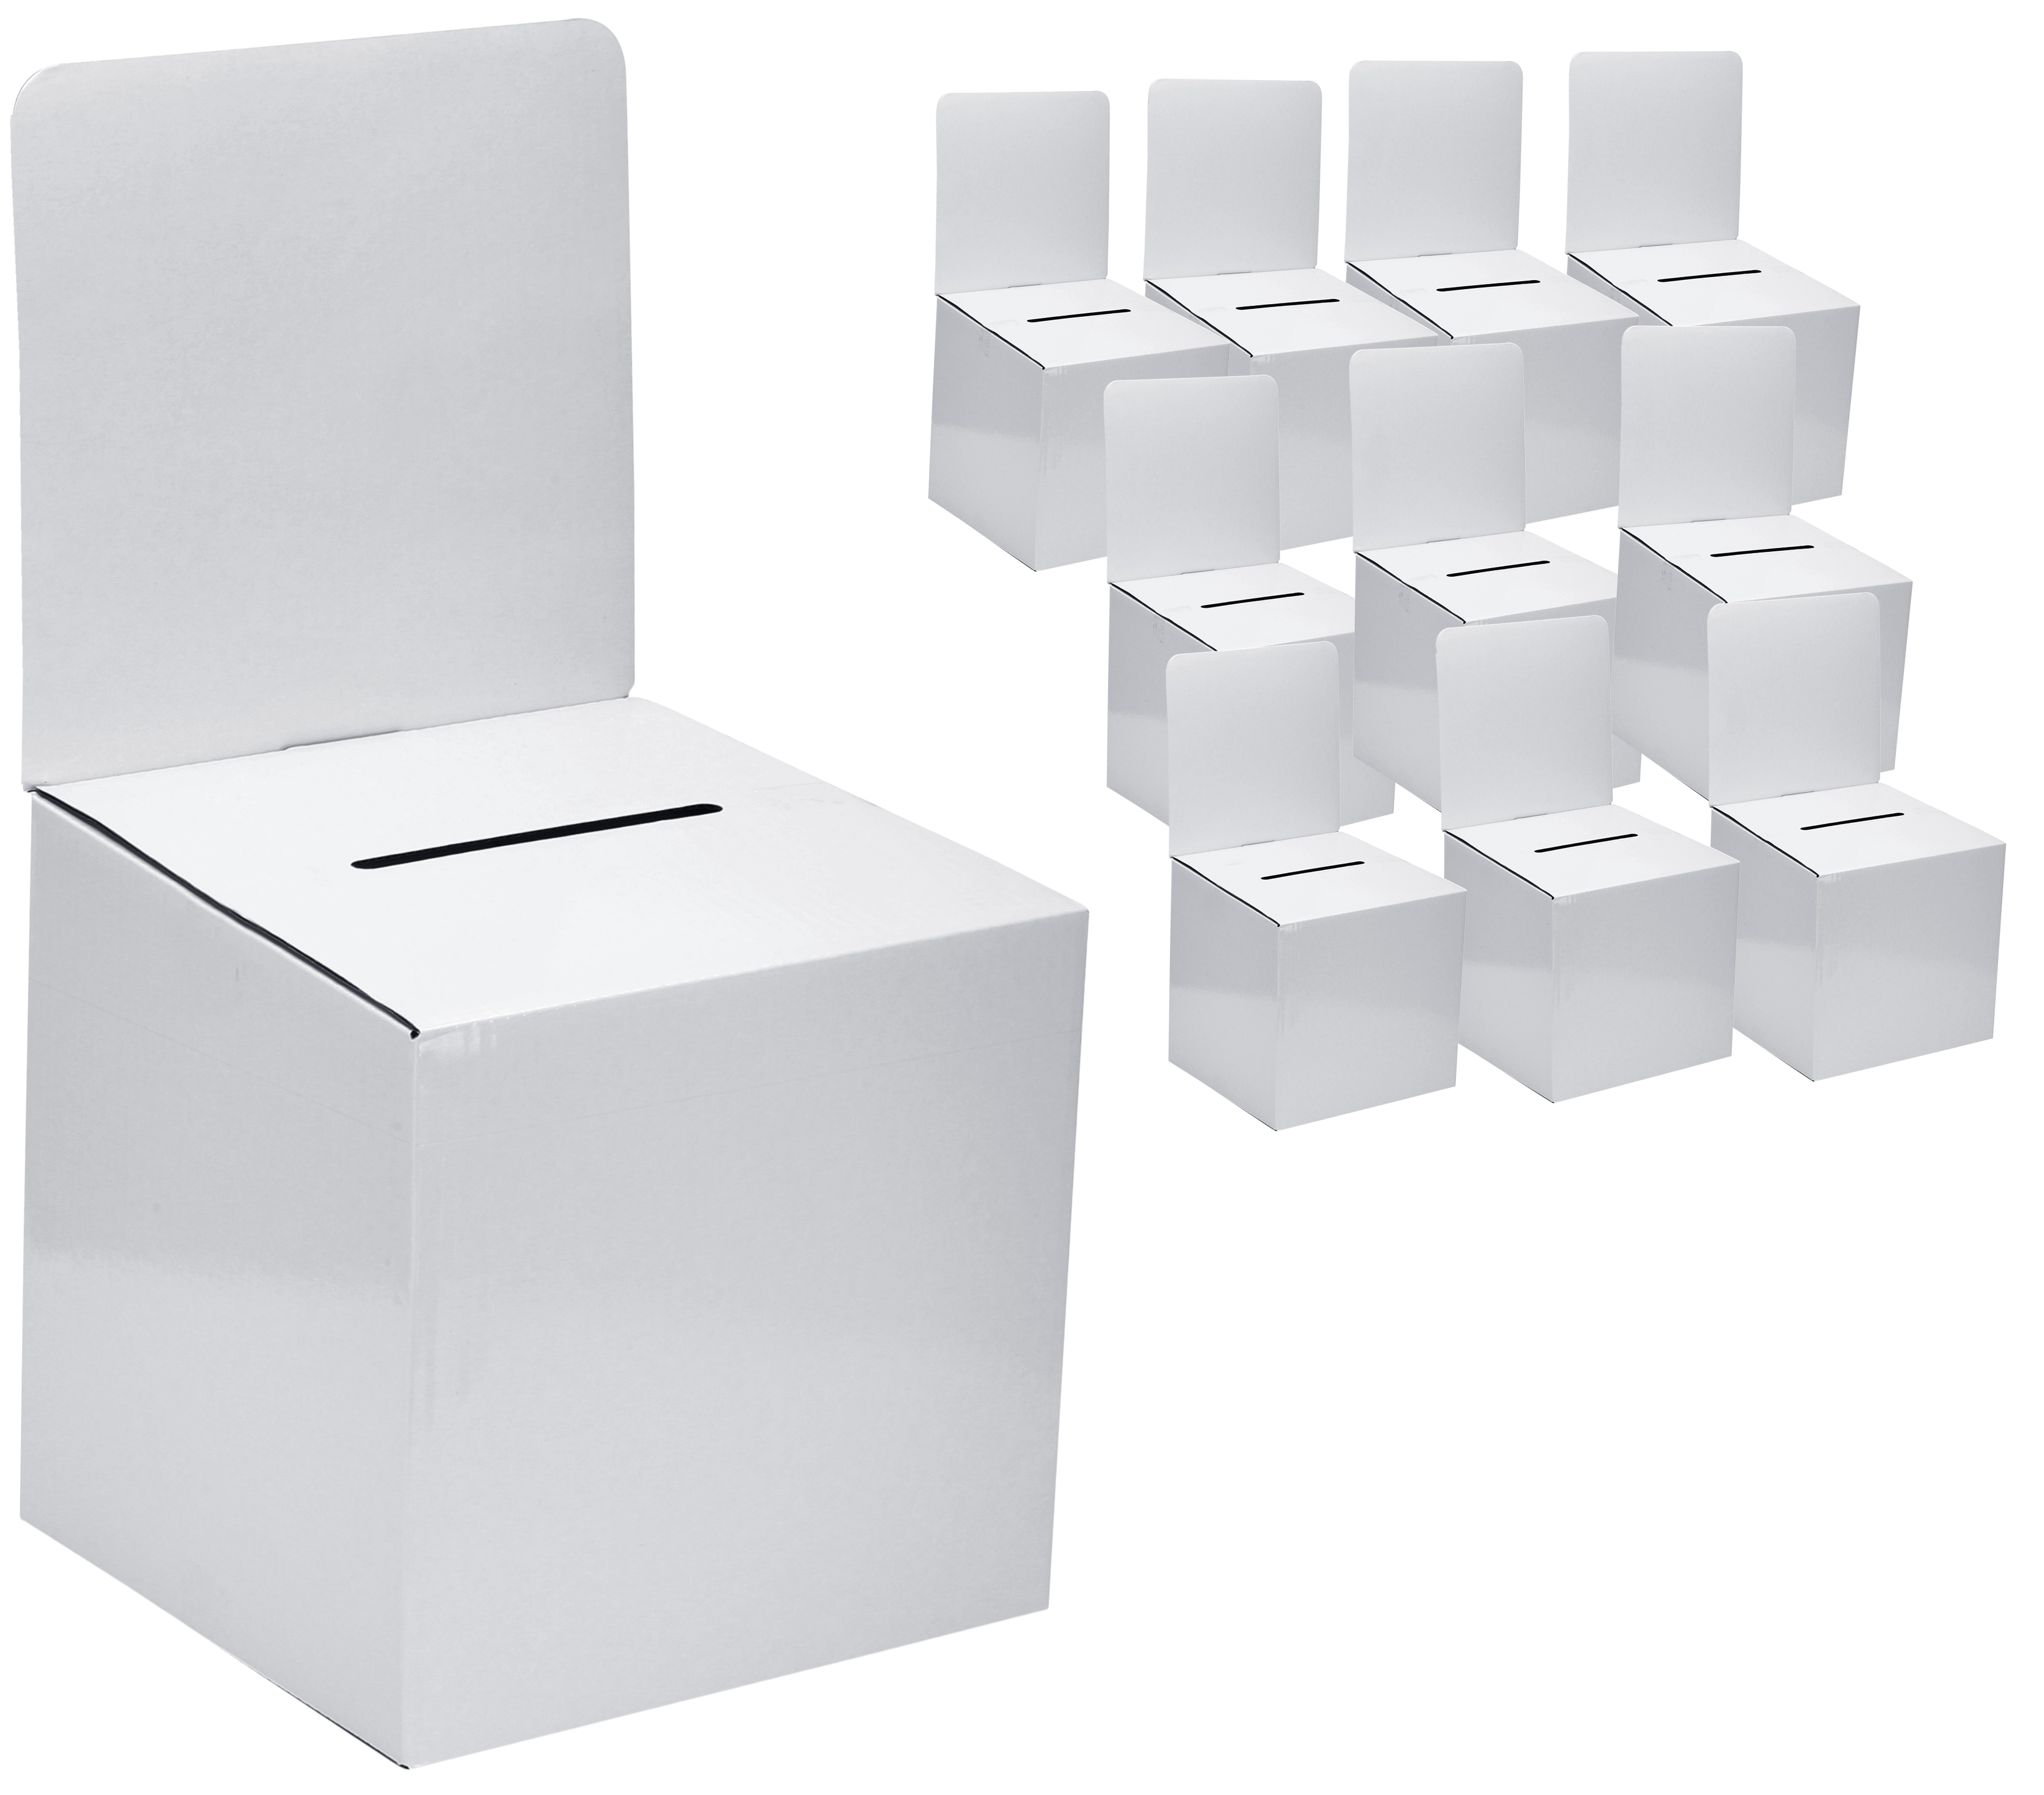 FitBody Boot Camp White Ballot Entry Boxes - 50 Pack